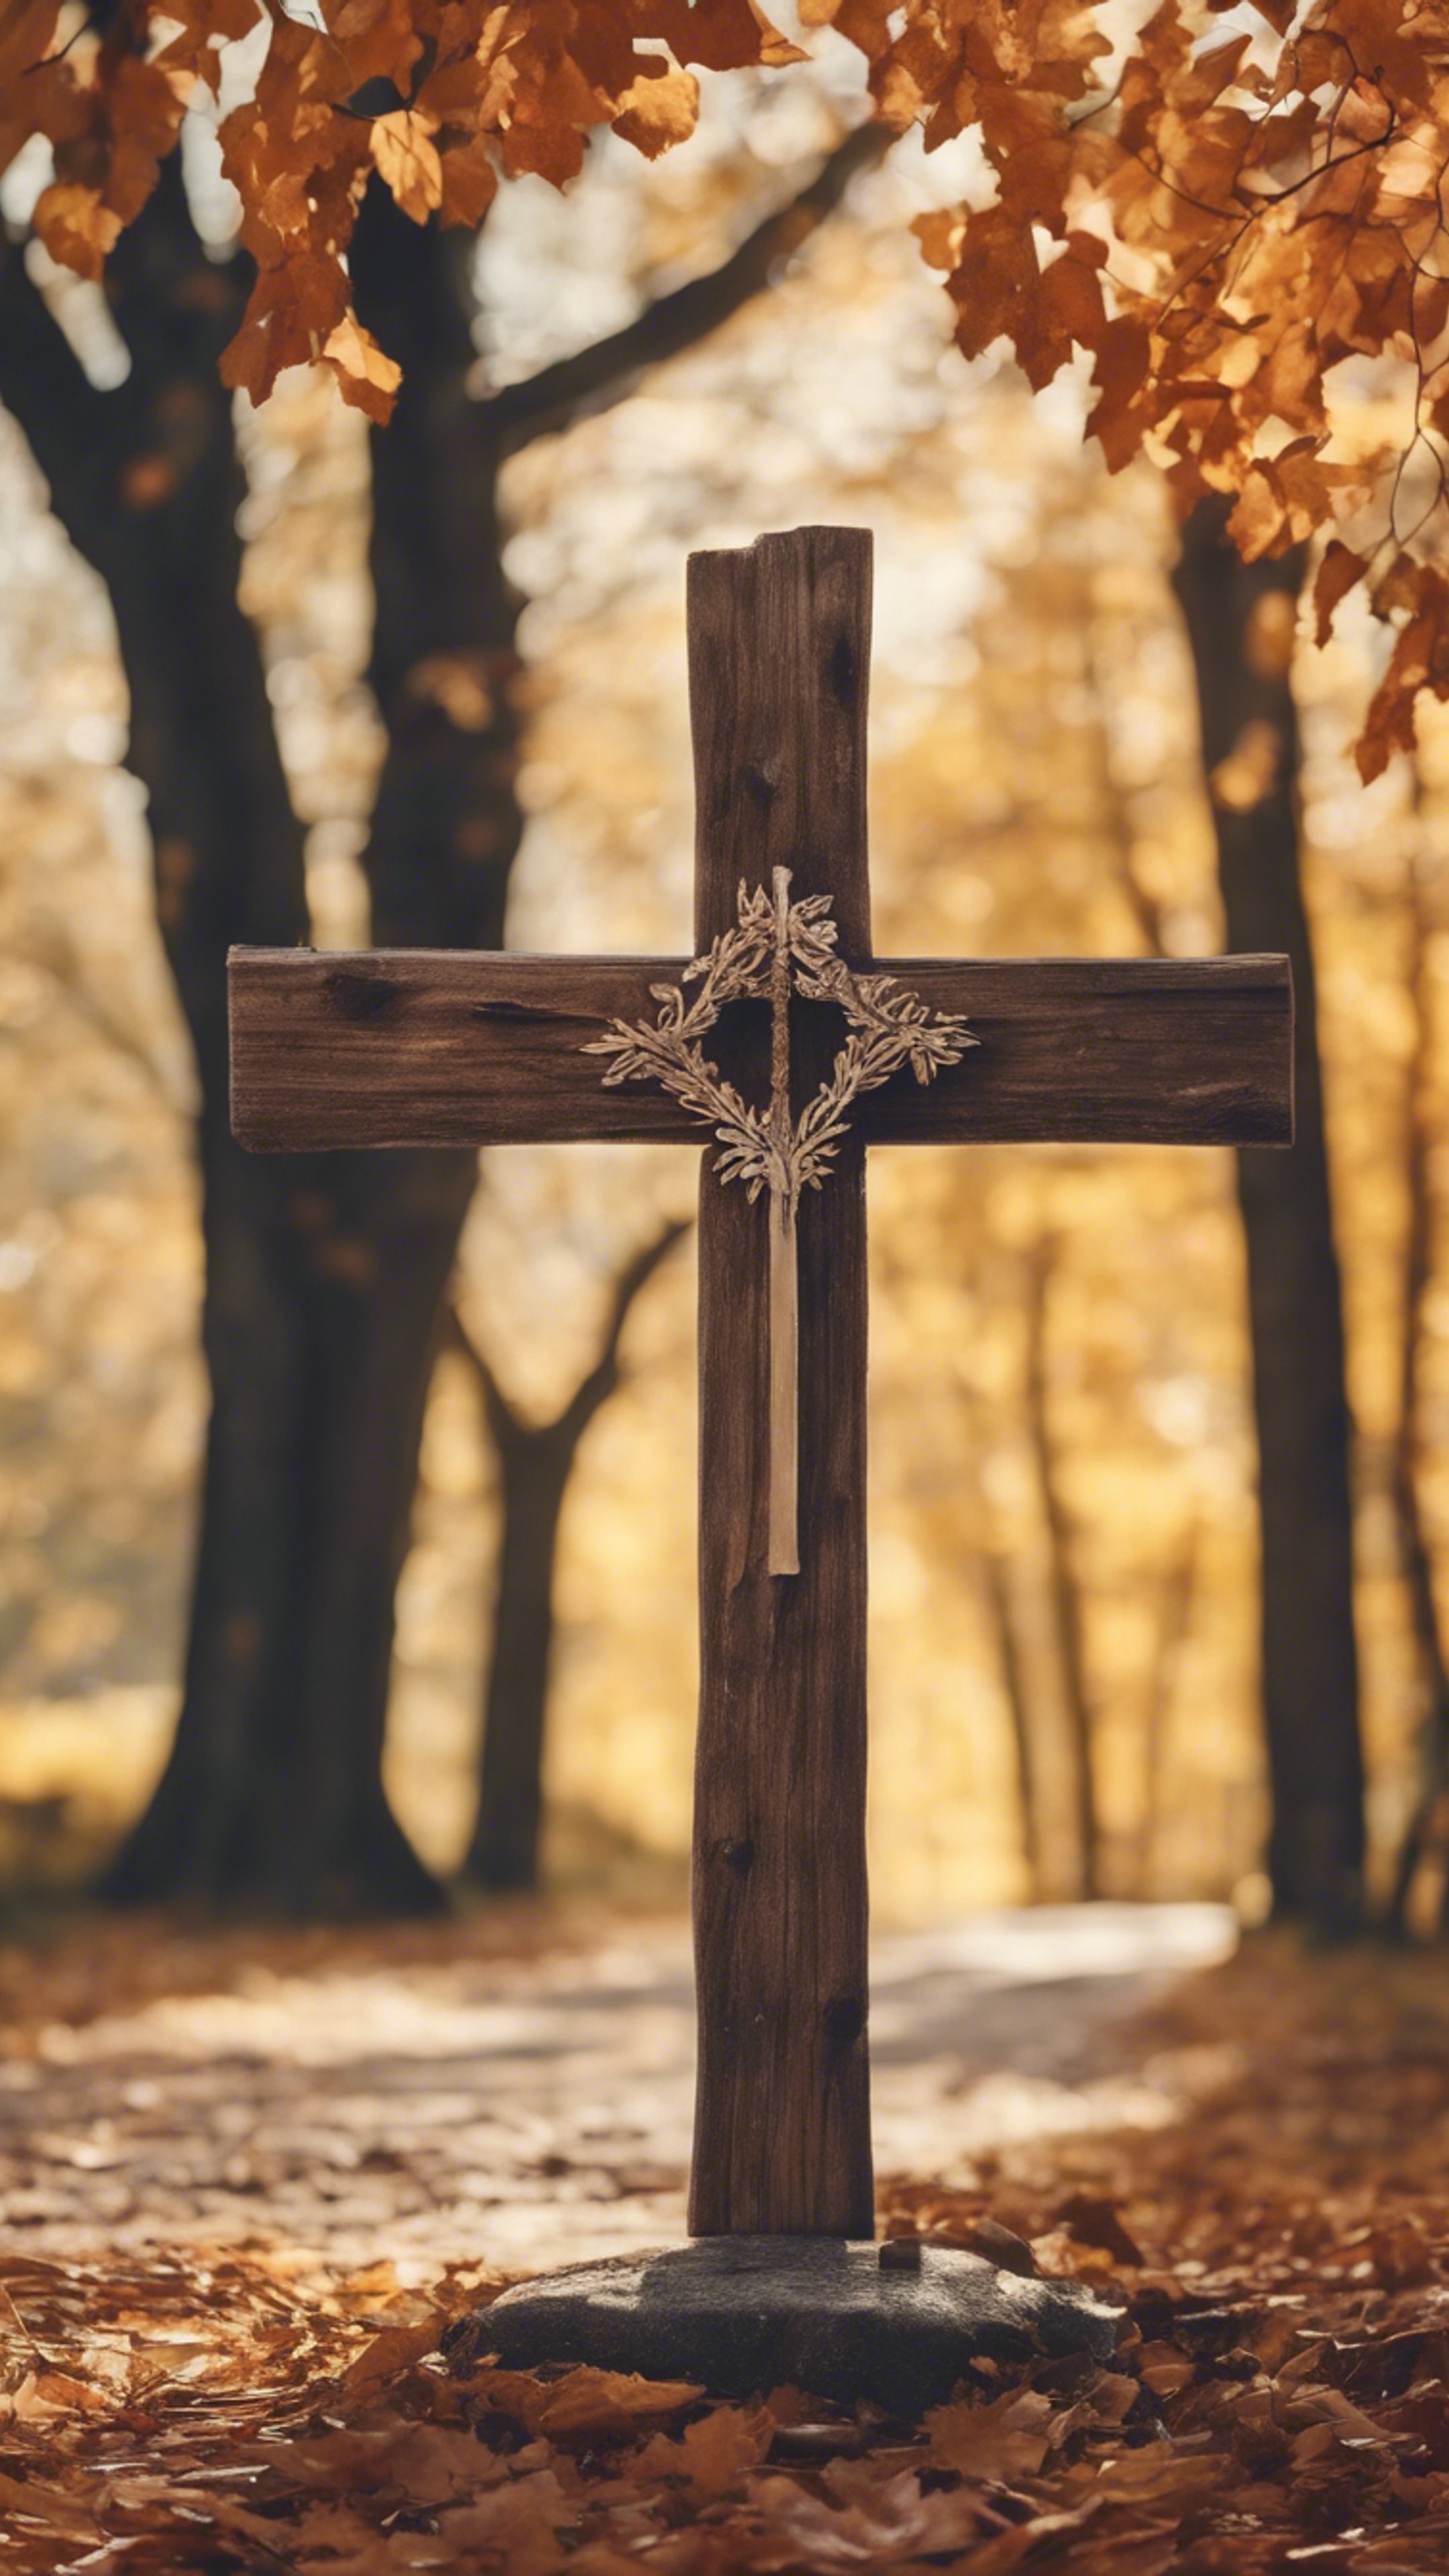 A rustic wooden cross standing by a country road, surrounded by autumn leaves. duvar kağıdı[8ef87987617941c481d6]